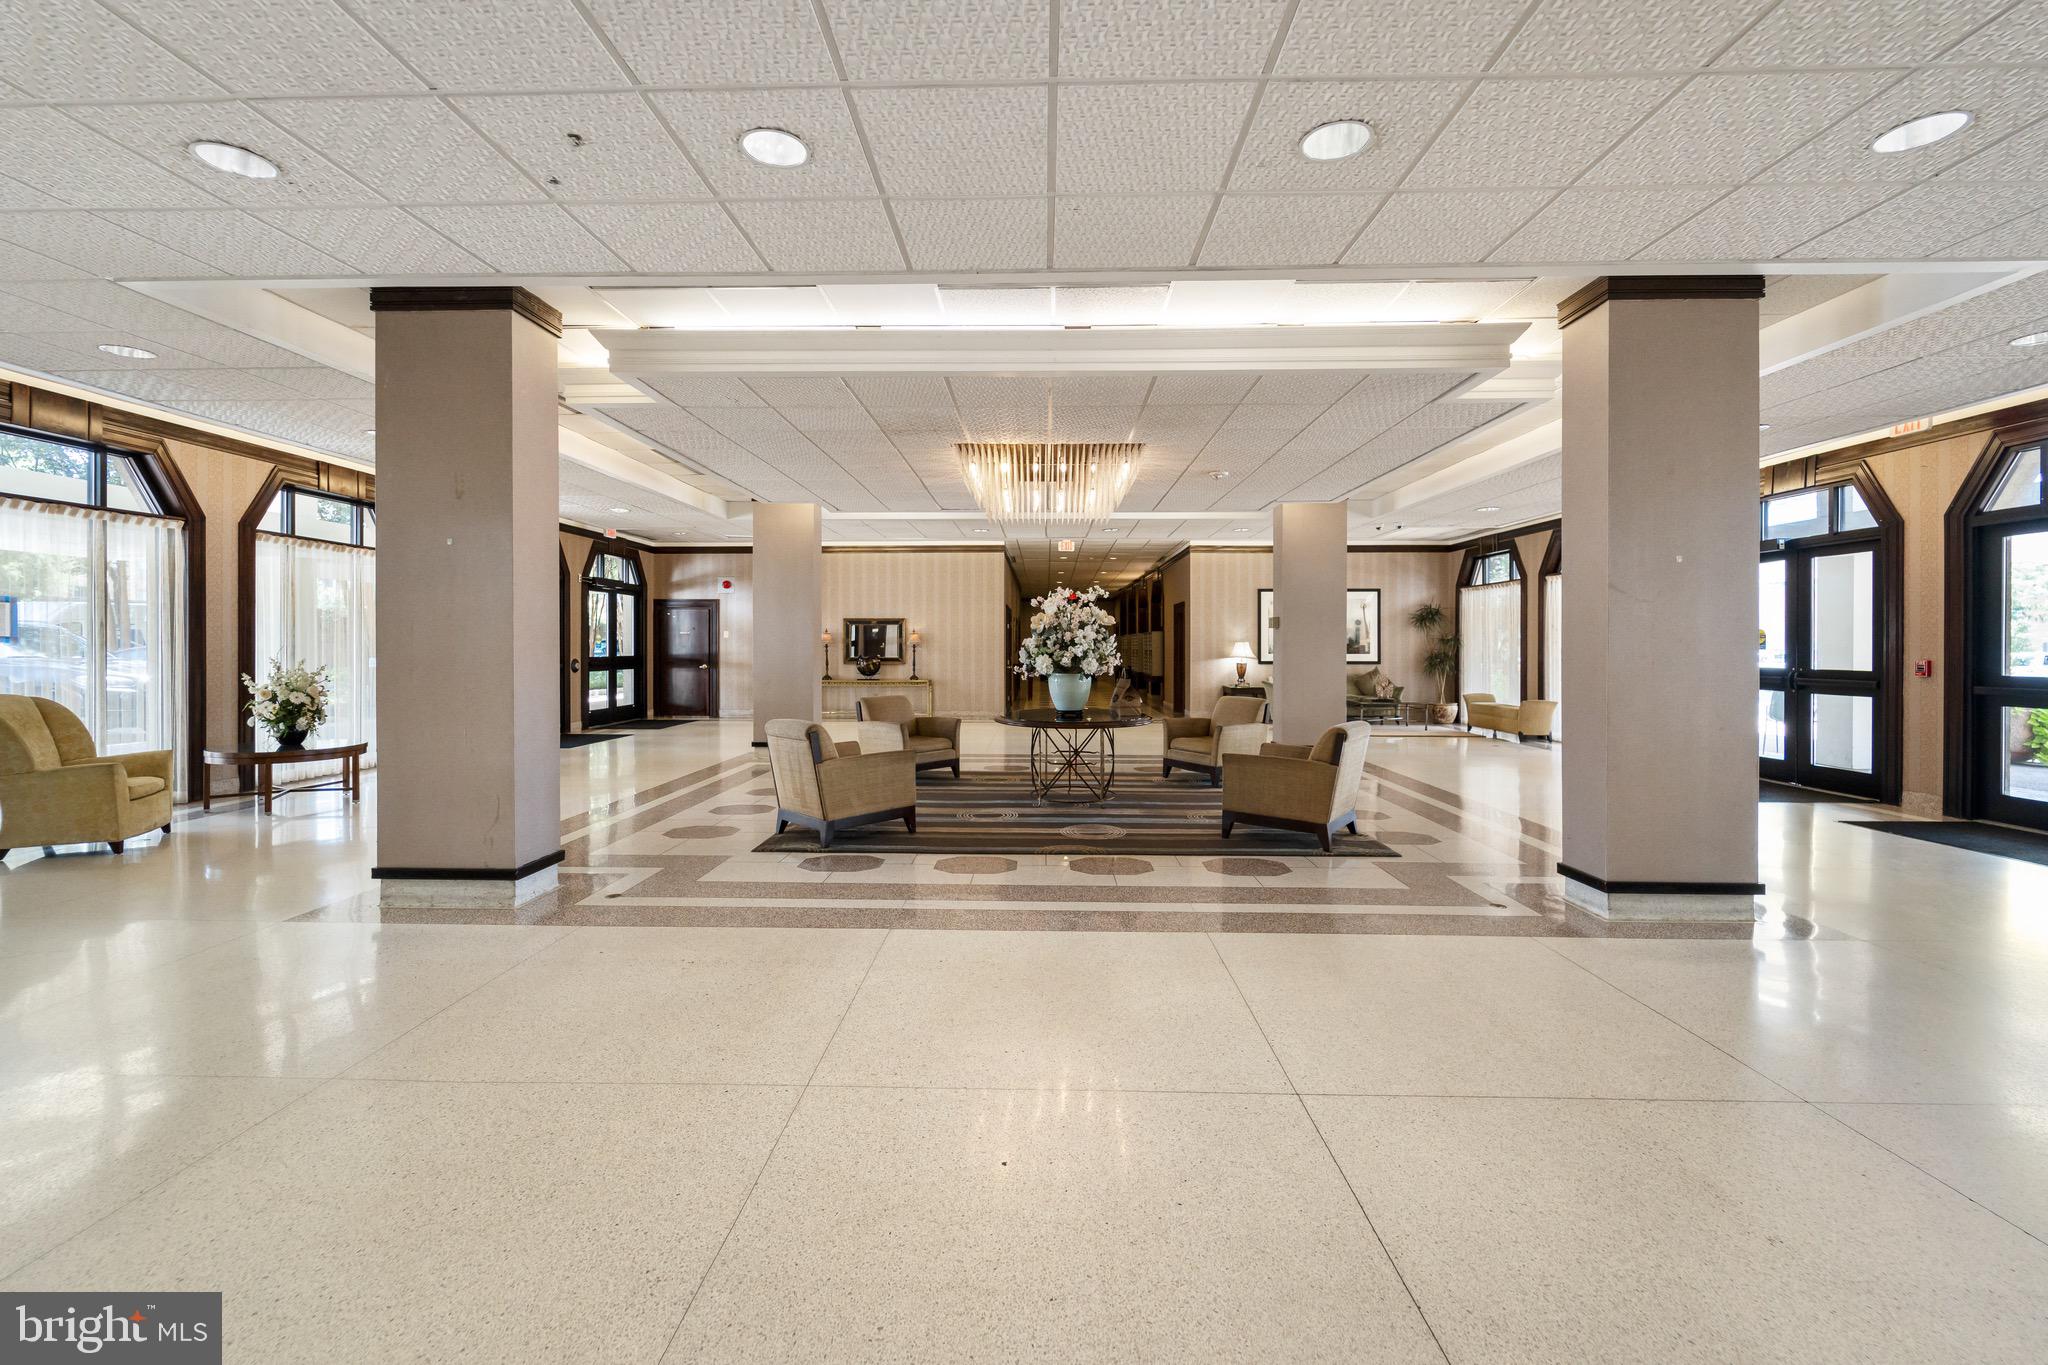 a view of a lobby with furniture